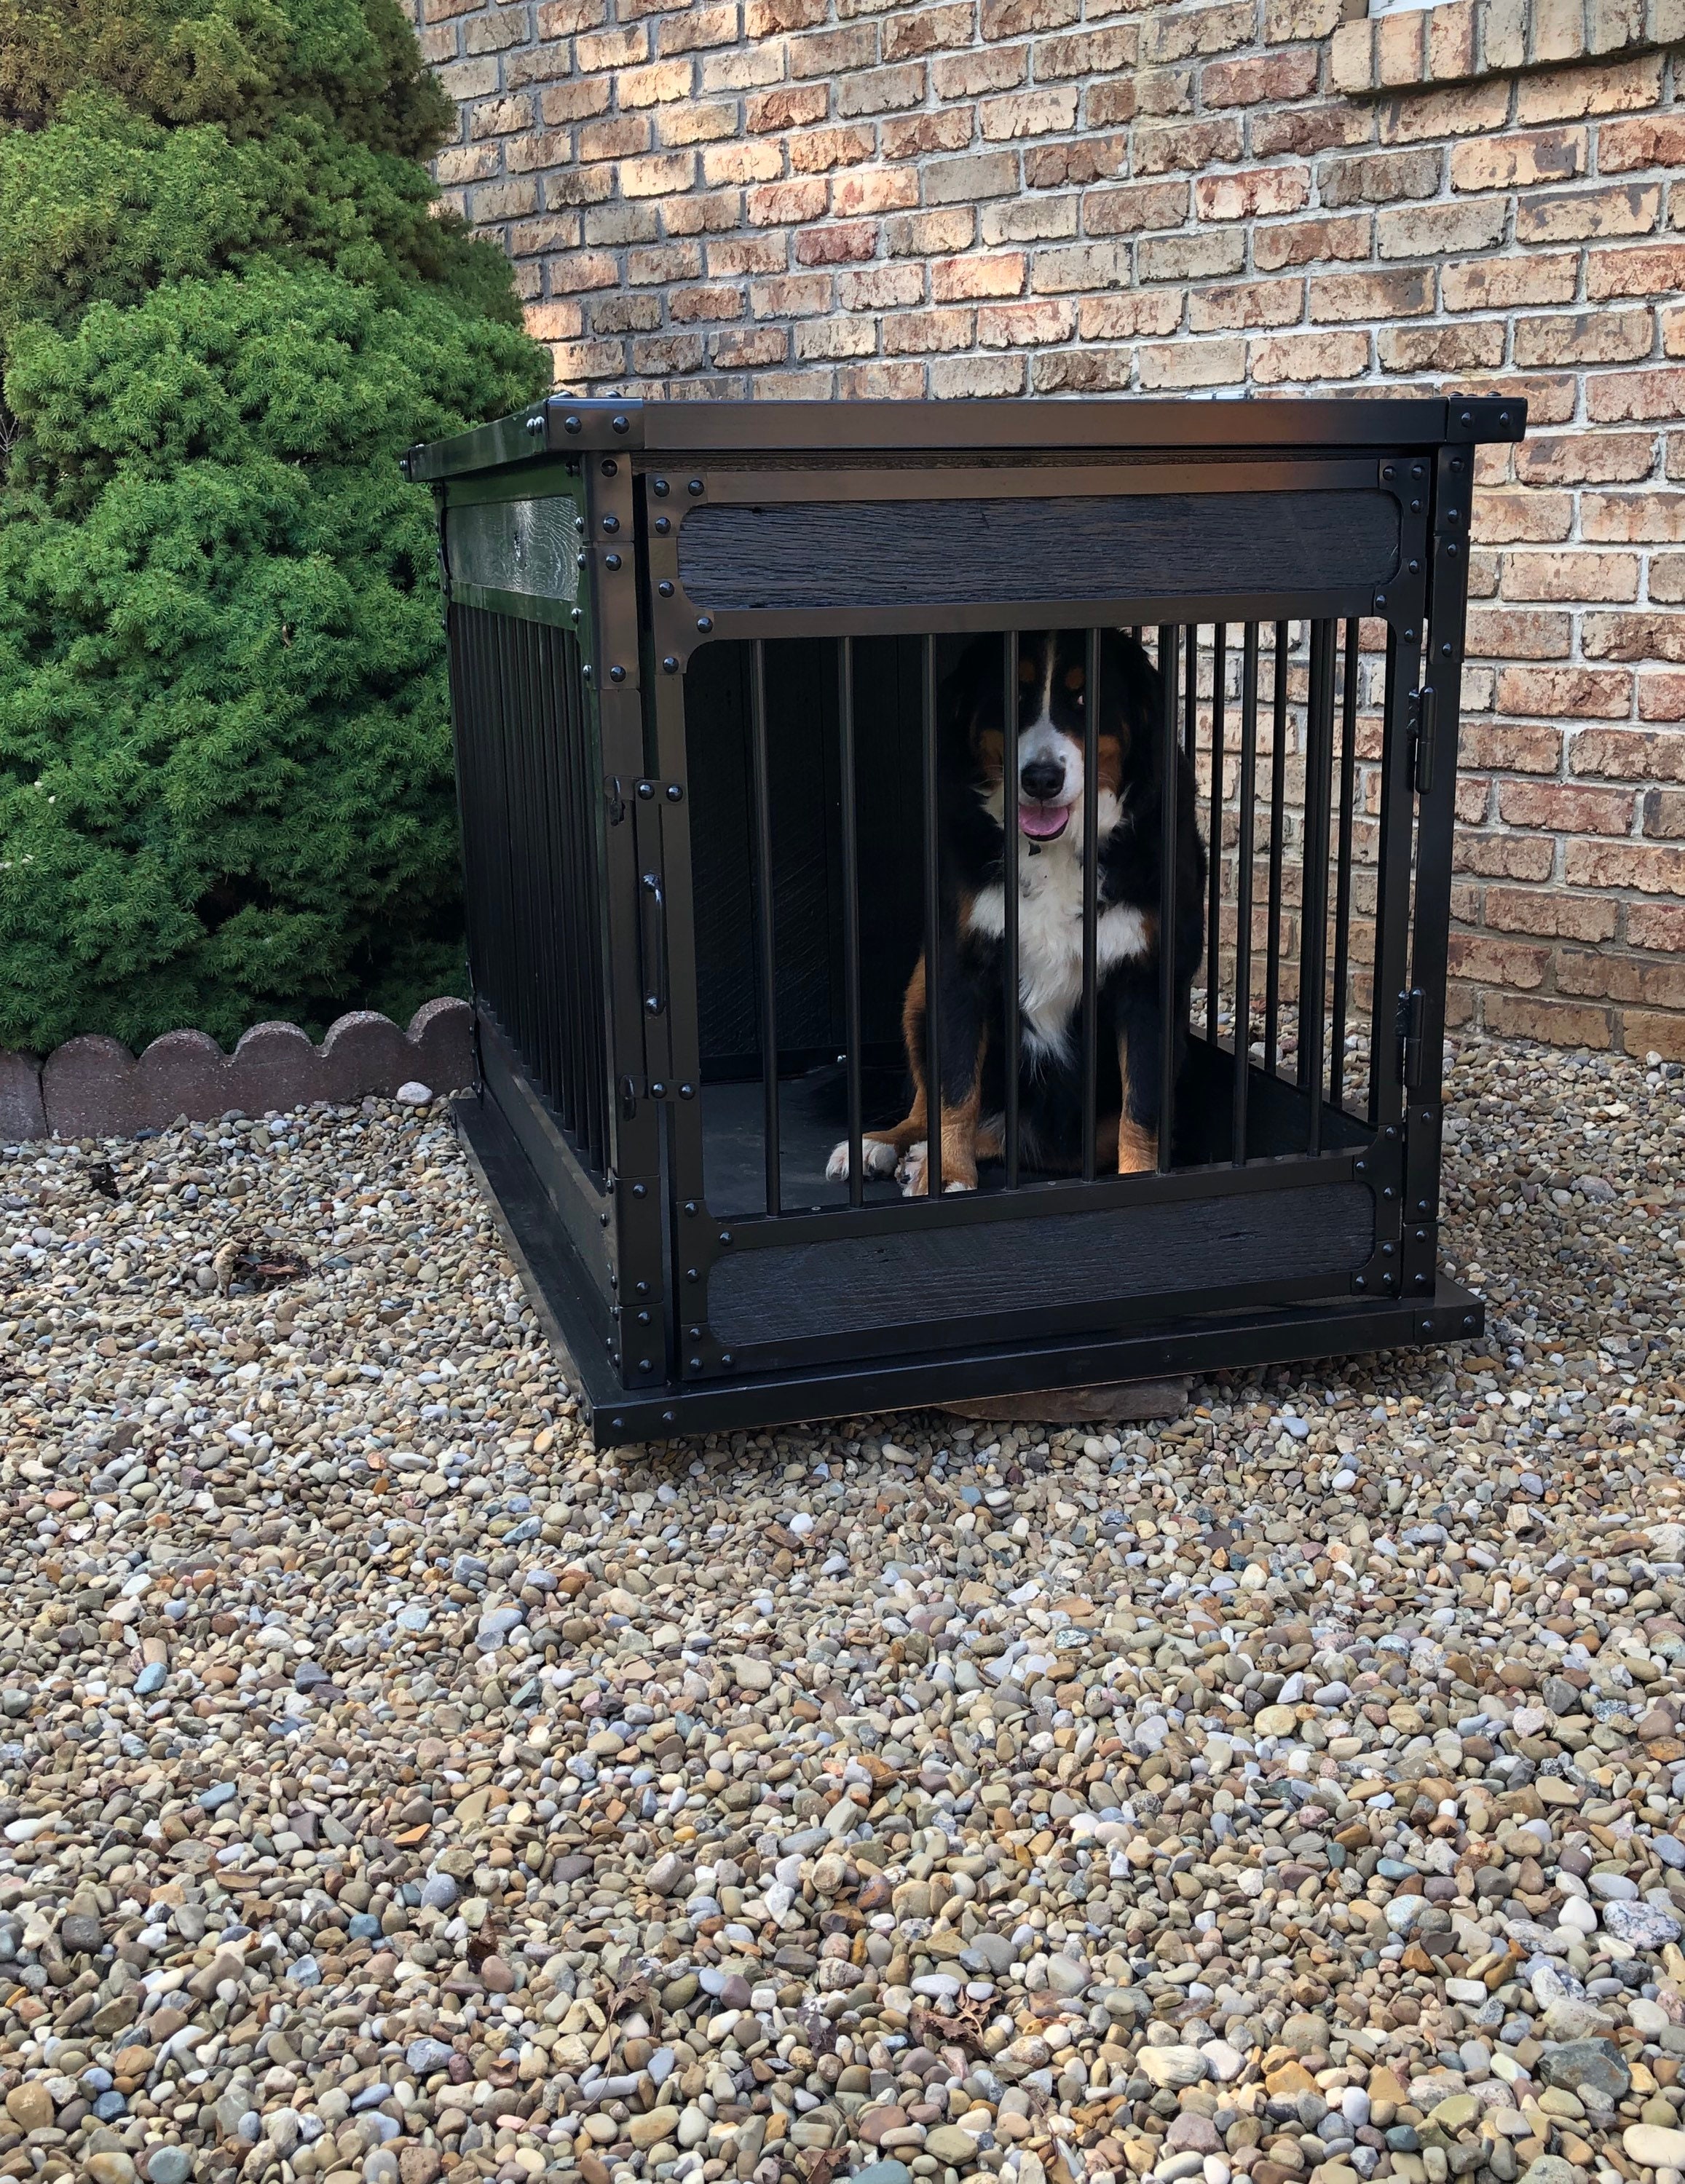 Ask Crystal: How to Make the Crate Great! - Blue Ridge Humane Society